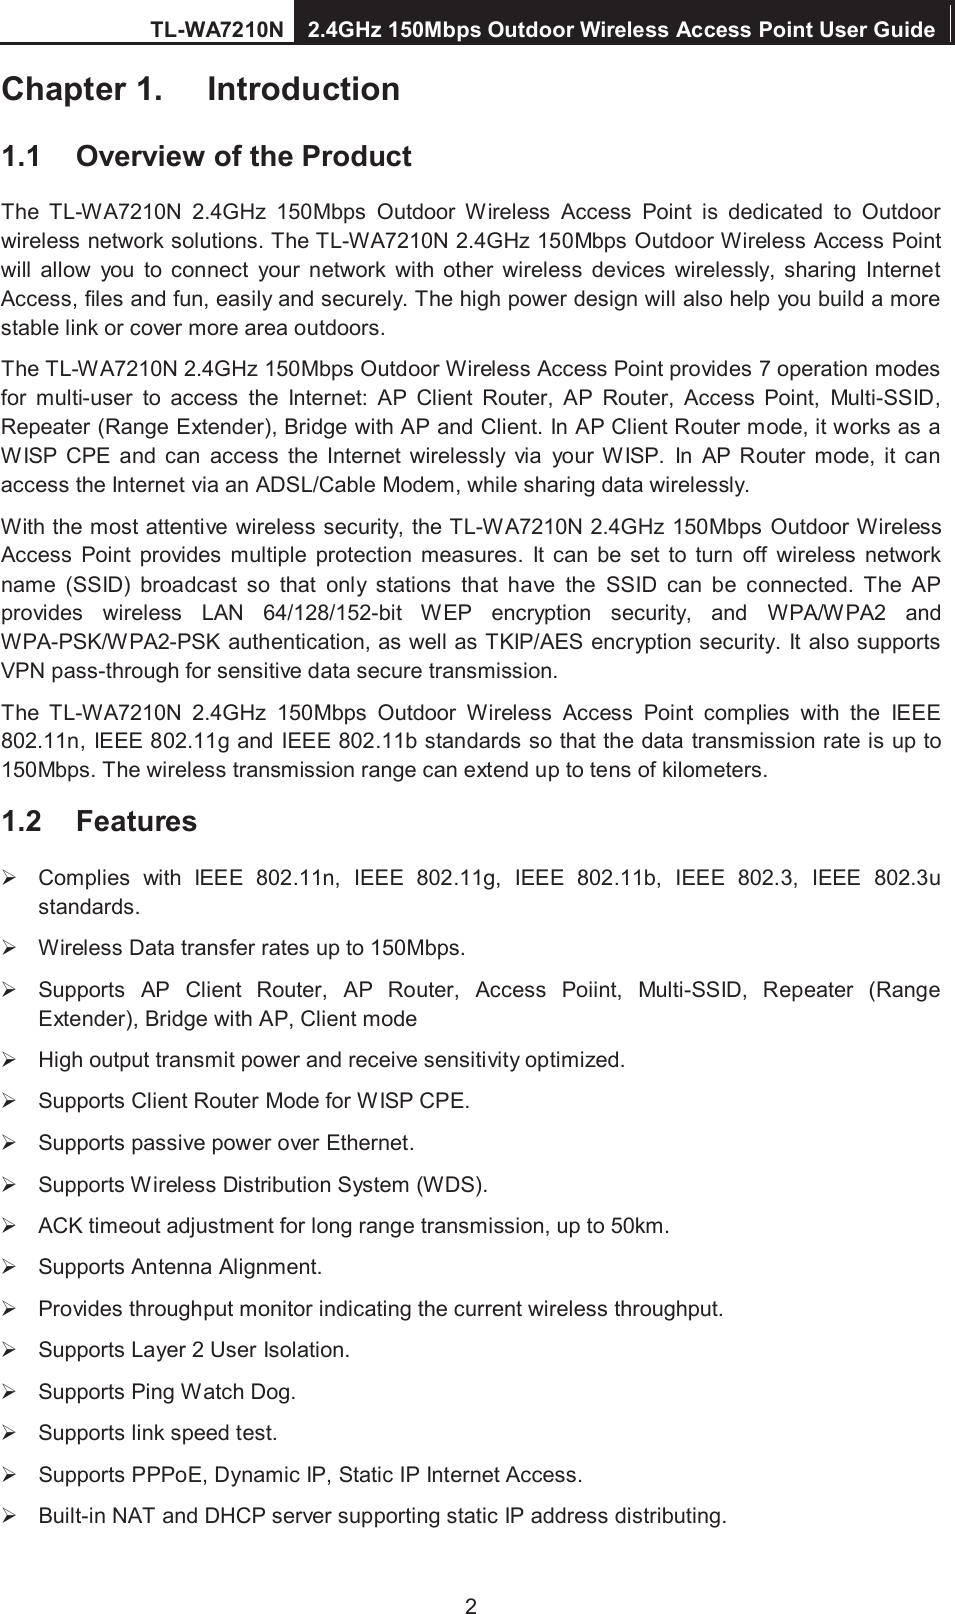 TL-WA7210N 2.4GHz 150Mbps Outdoor Wireless Access Point User Guide  2 Chapter 1.  Introduction 1.1  Overview of the Product The  TL-WA7210N  2.4GHz  150Mbps  Outdoor  Wireless  Access  Point  is  dedicated  to  Outdoor wireless network solutions. The TL-WA7210N 2.4GHz 150Mbps Outdoor Wireless Access Point will  allow  you  to  connect  your  network  with  other  wireless  devices  wirelessly,  sharing  Internet Access, files and fun, easily and securely. The high power design will also help you build a more stable link or cover more area outdoors. The TL-WA7210N 2.4GHz 150Mbps Outdoor Wireless Access Point provides 7 operation modes for  multi-user  to  access  the  Internet:  AP  Client  Router,  AP  Router,  Access  Point,  Multi-SSID, Repeater (Range Extender), Bridge with AP and Client. In AP Client Router mode, it works as a WISP  CPE  and  can  access  the  Internet  wirelessly  via  your WISP.  In  AP  Router  mode,  it  can access the Internet via an ADSL/Cable Modem, while sharing data wirelessly.   With the most attentive wireless security, the TL-WA7210N 2.4GHz 150Mbps Outdoor Wireless Access  Point  provides  multiple  protection  measures.  It can be  set  to  turn  off  wireless  network name  (SSID)  broadcast  so  that  only  stations  that  have  the  SSID  can  be  connected.  The  AP provides  wireless  LAN  64/128/152-bit  WEP encryption  security,  and  WPA/WPA2  and WPA-PSK/WPA2-PSK authentication, as well as TKIP/AES encryption security. It also supports VPN pass-through for sensitive data secure transmission. The  TL-WA7210N  2.4GHz  150Mbps  Outdoor  Wireless  Access  Point  complies  with  the  IEEE 802.11n, IEEE 802.11g and IEEE 802.11b standards so that the data transmission rate is up to 150Mbps. The wireless transmission range can extend up to tens of kilometers. 1.2  Features   Complies  with  IEEE  802.11n,  IEEE  802.11g,  IEEE  802.11b,  IEEE  802.3,  IEEE 802.3u standards.   Wireless Data transfer rates up to 150Mbps.   Supports  AP  Client  Router,  AP  Router,  Access  Poiint,  Multi-SSID,  Repeater  (Range Extender), Bridge with AP, Client mode   High output transmit power and receive sensitivity optimized.   Supports Client Router Mode for WISP CPE.   Supports passive power over Ethernet.   Supports Wireless Distribution System (WDS).   ACK timeout adjustment for long range transmission, up to 50km.   Supports Antenna Alignment.   Provides throughput monitor indicating the current wireless throughput.   Supports Layer 2 User Isolation.   Supports Ping Watch Dog.   Supports link speed test.   Supports PPPoE, Dynamic IP, Static IP Internet Access.   Built-in NAT and DHCP server supporting static IP address distributing. 